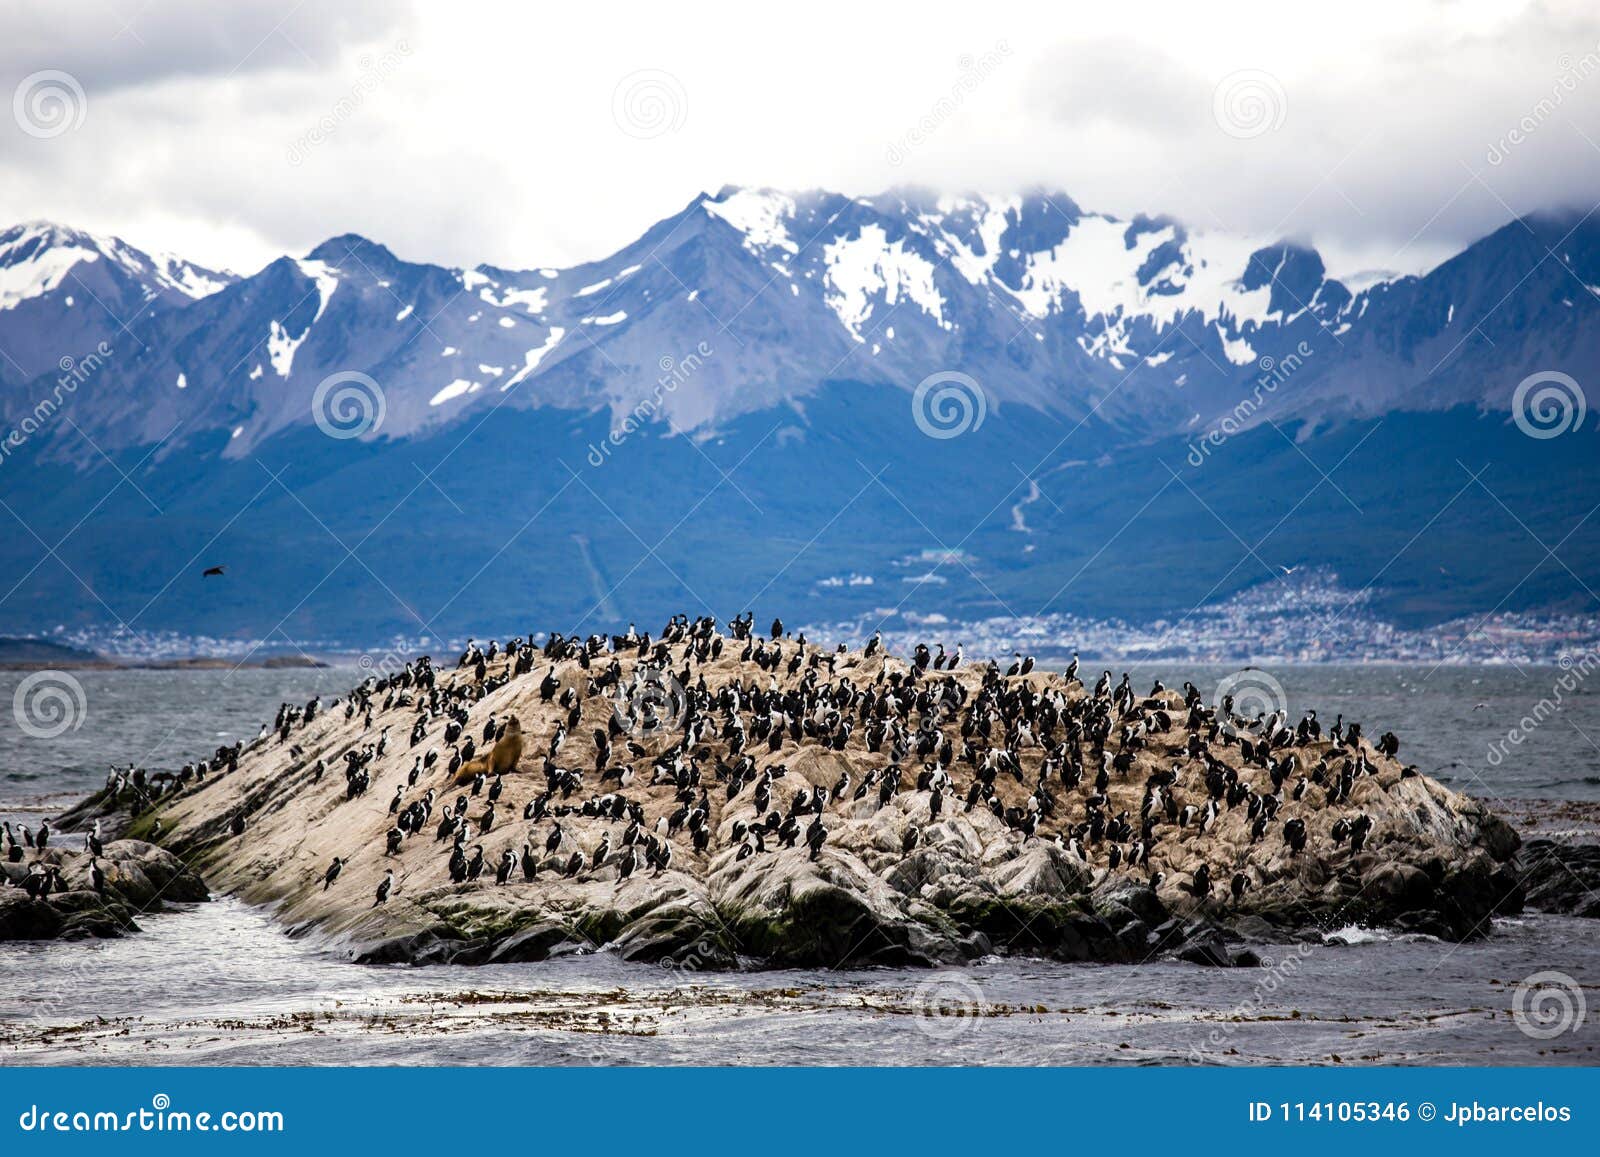 cormorant colony on an island at ushuaia in the beagle channel beagle strait, tierra del fuego, argentina